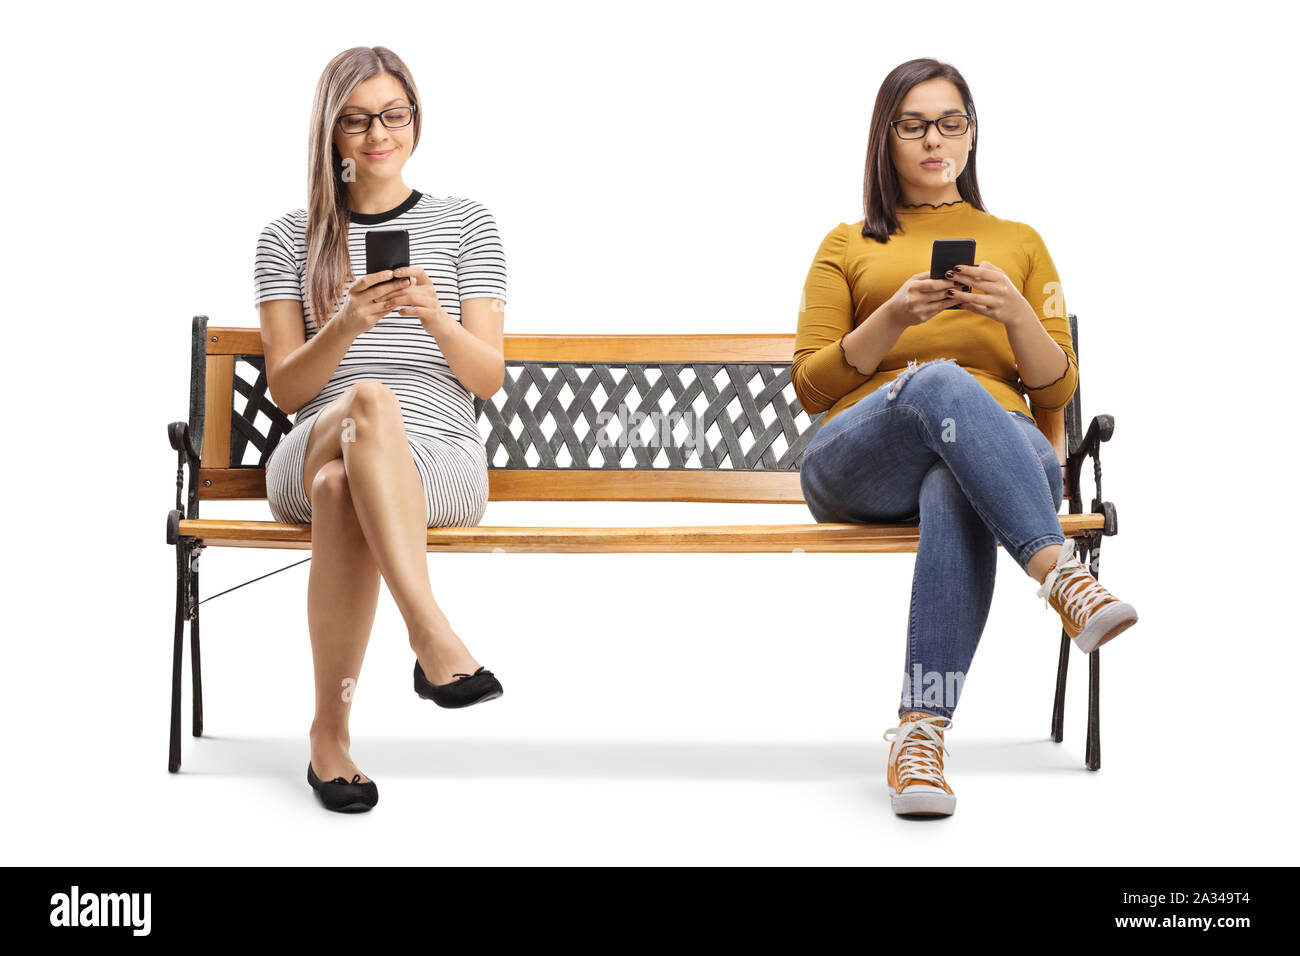 Two young women sitting on a bench and typing on smartphones isolated on white background Stock Photo